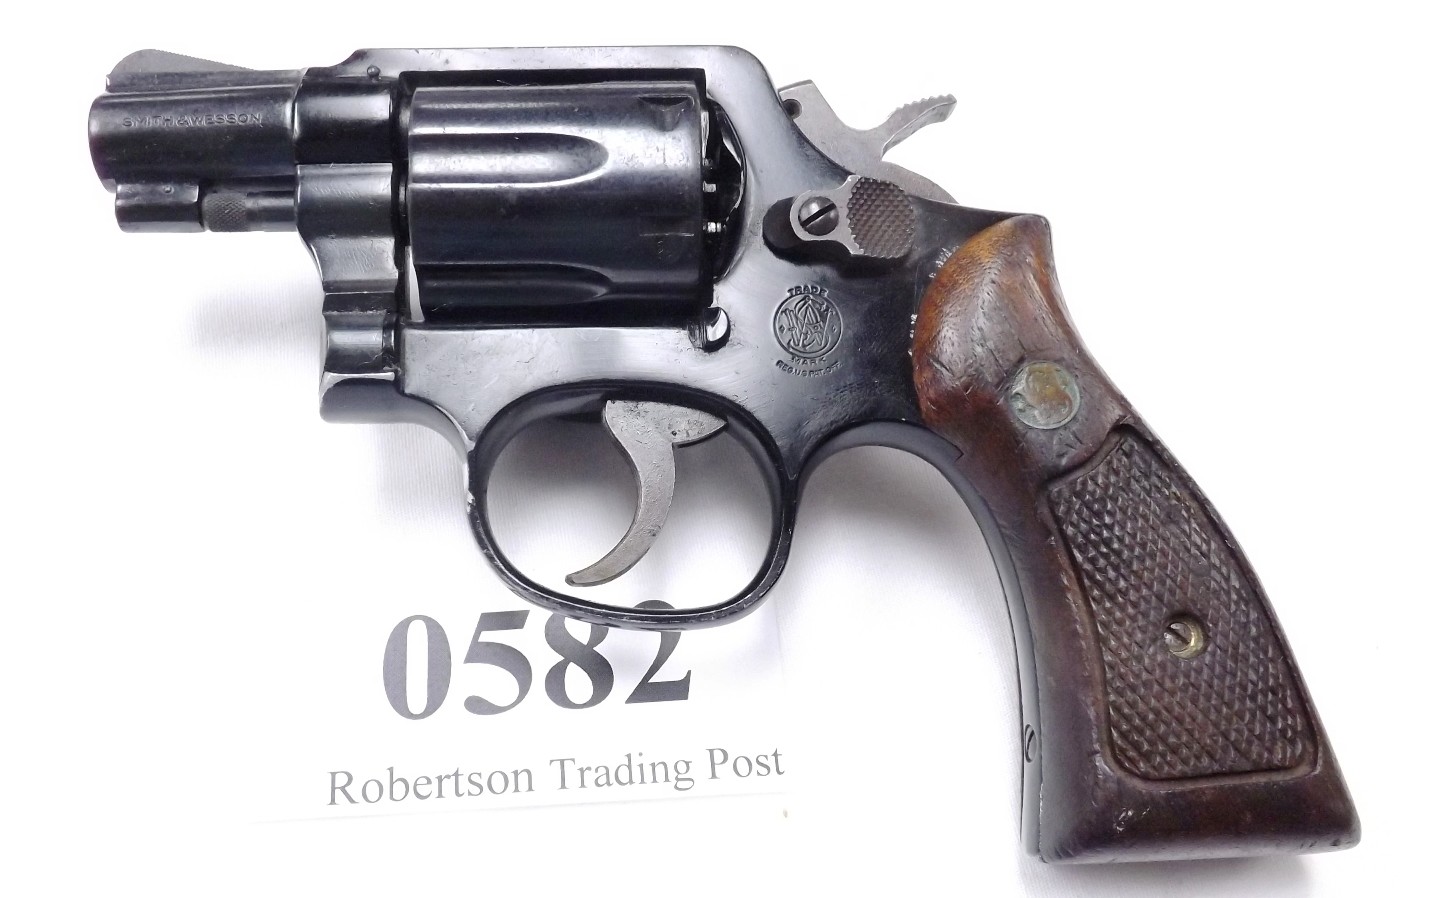 Smith & Wesson .38 model 12-3 Blue SB 2” 1979 Pinned Revolver Agency Marked S&W